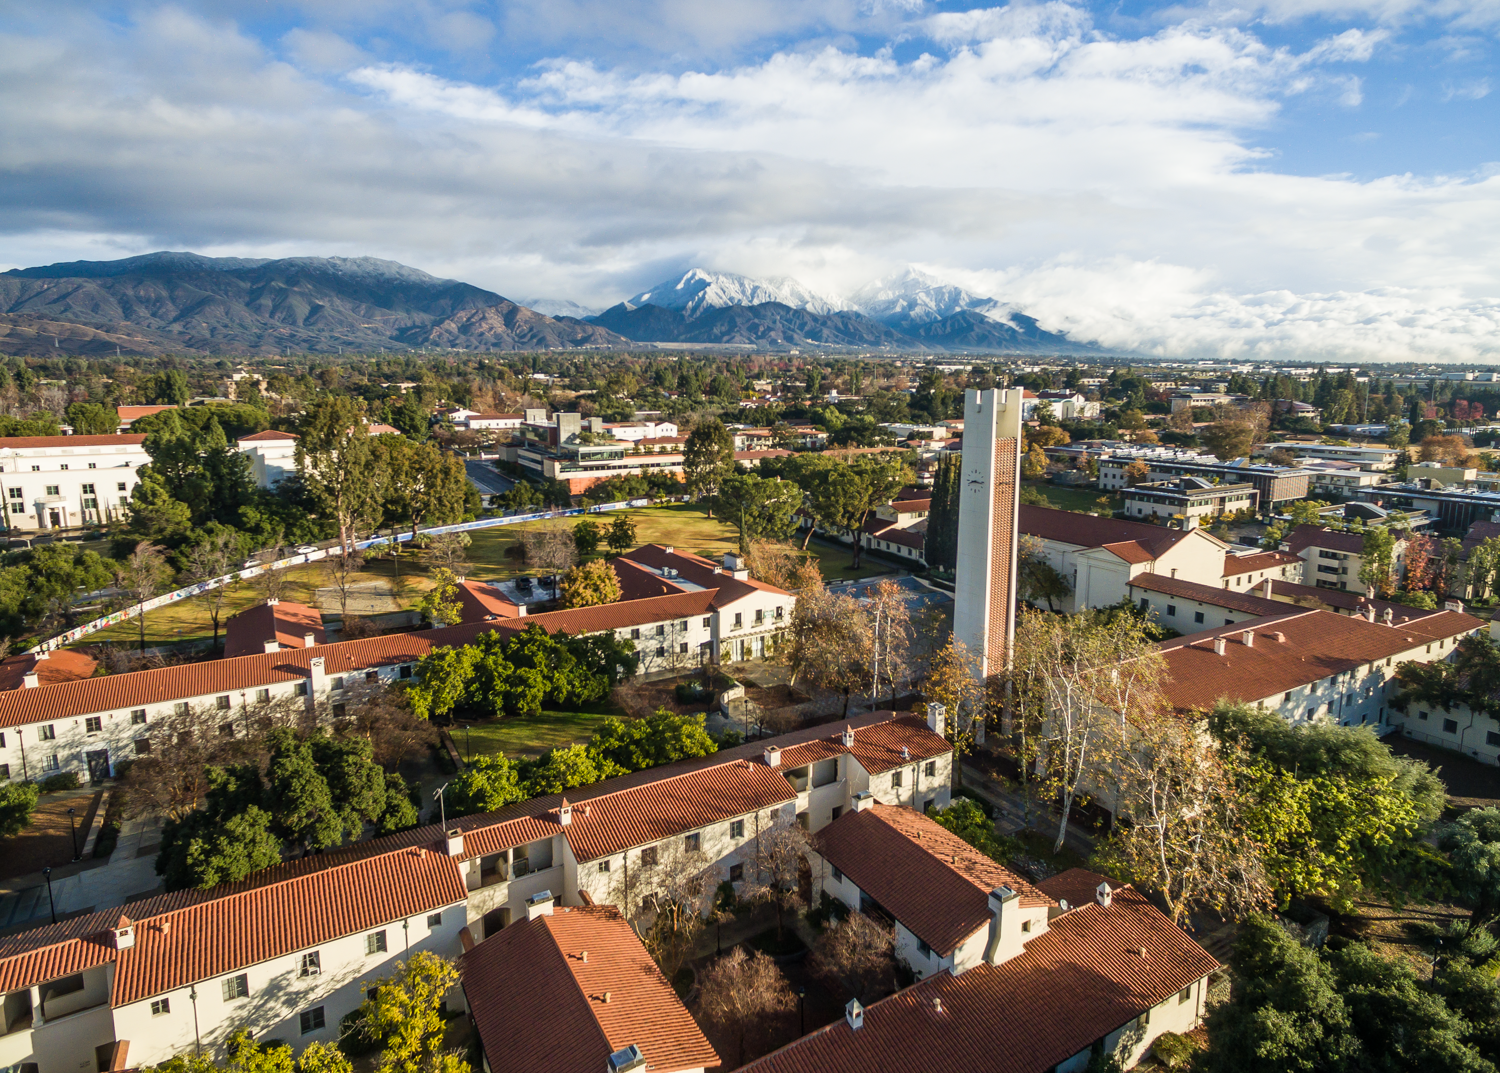 Claremont, CA: A Unique Fusion of Culture, Education, and Natural